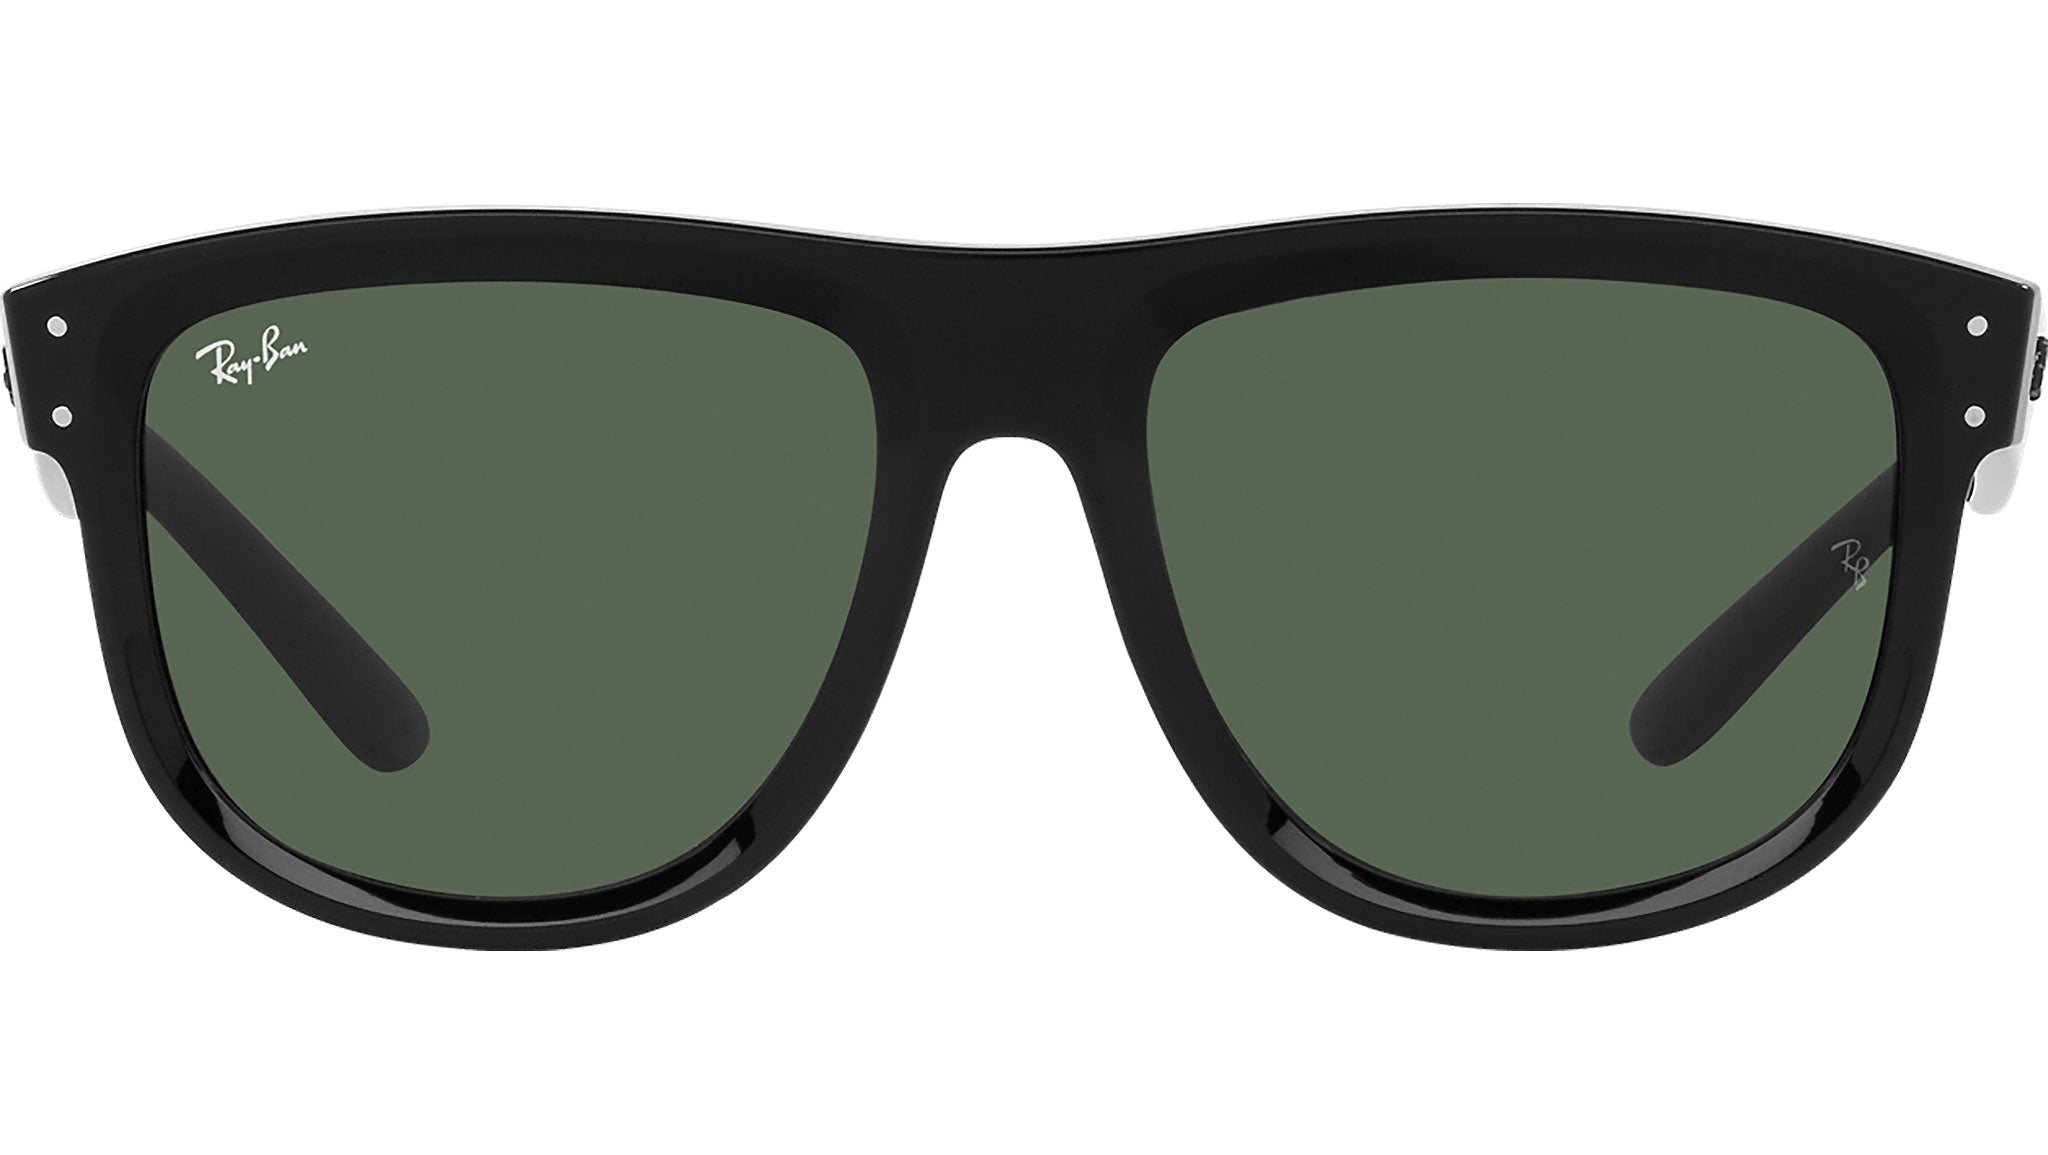 First Versions: Ray-Ban (sunglasses)